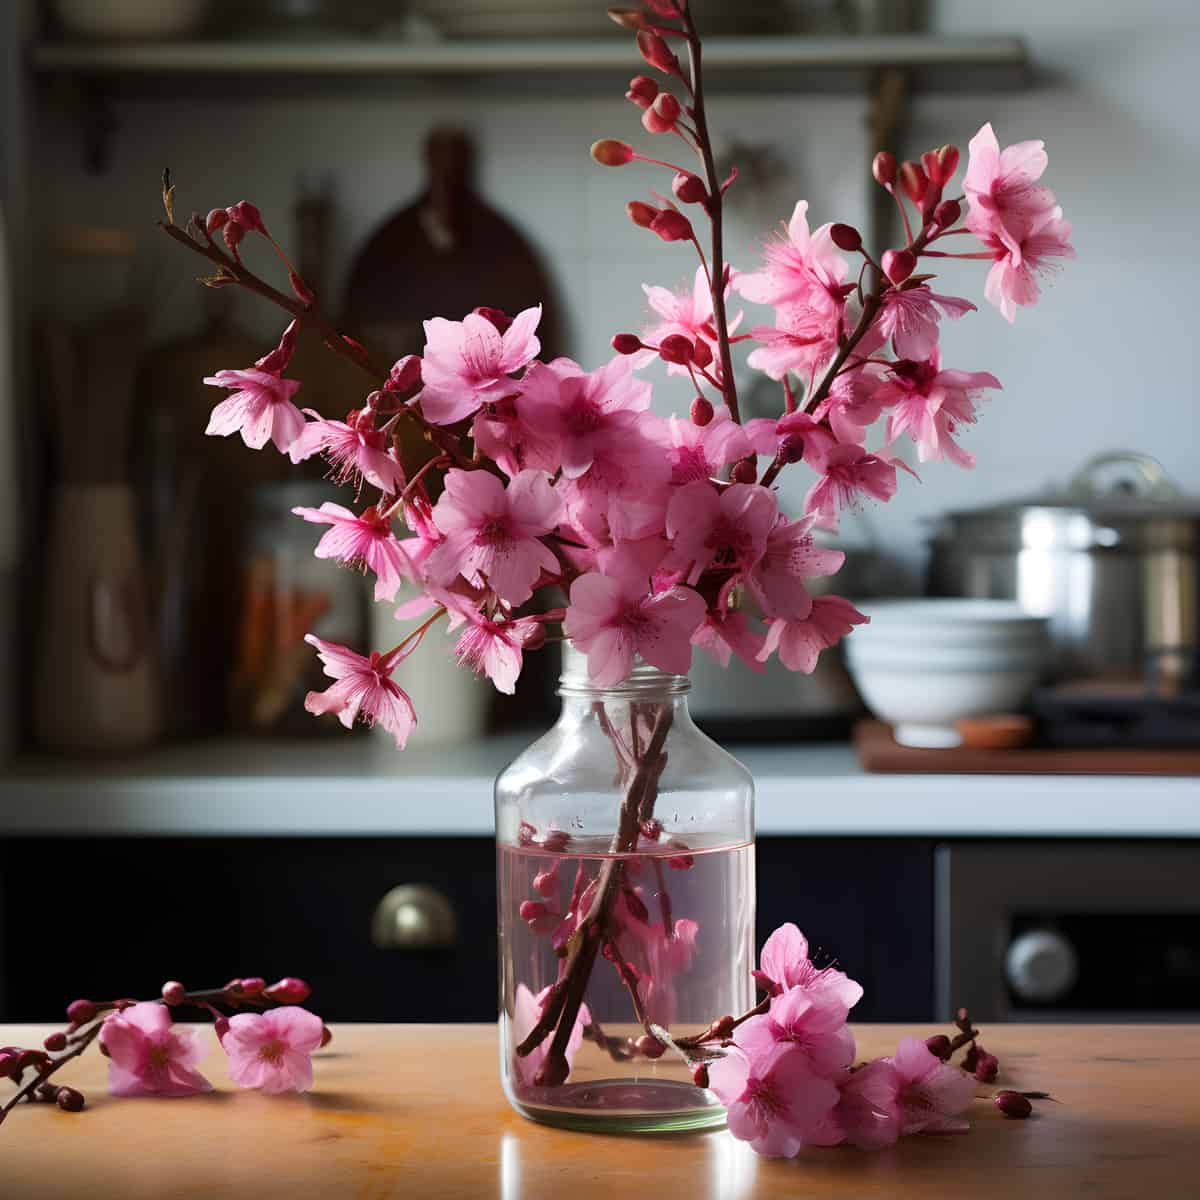 Wild Himalayan Cherries on a kitchen counter